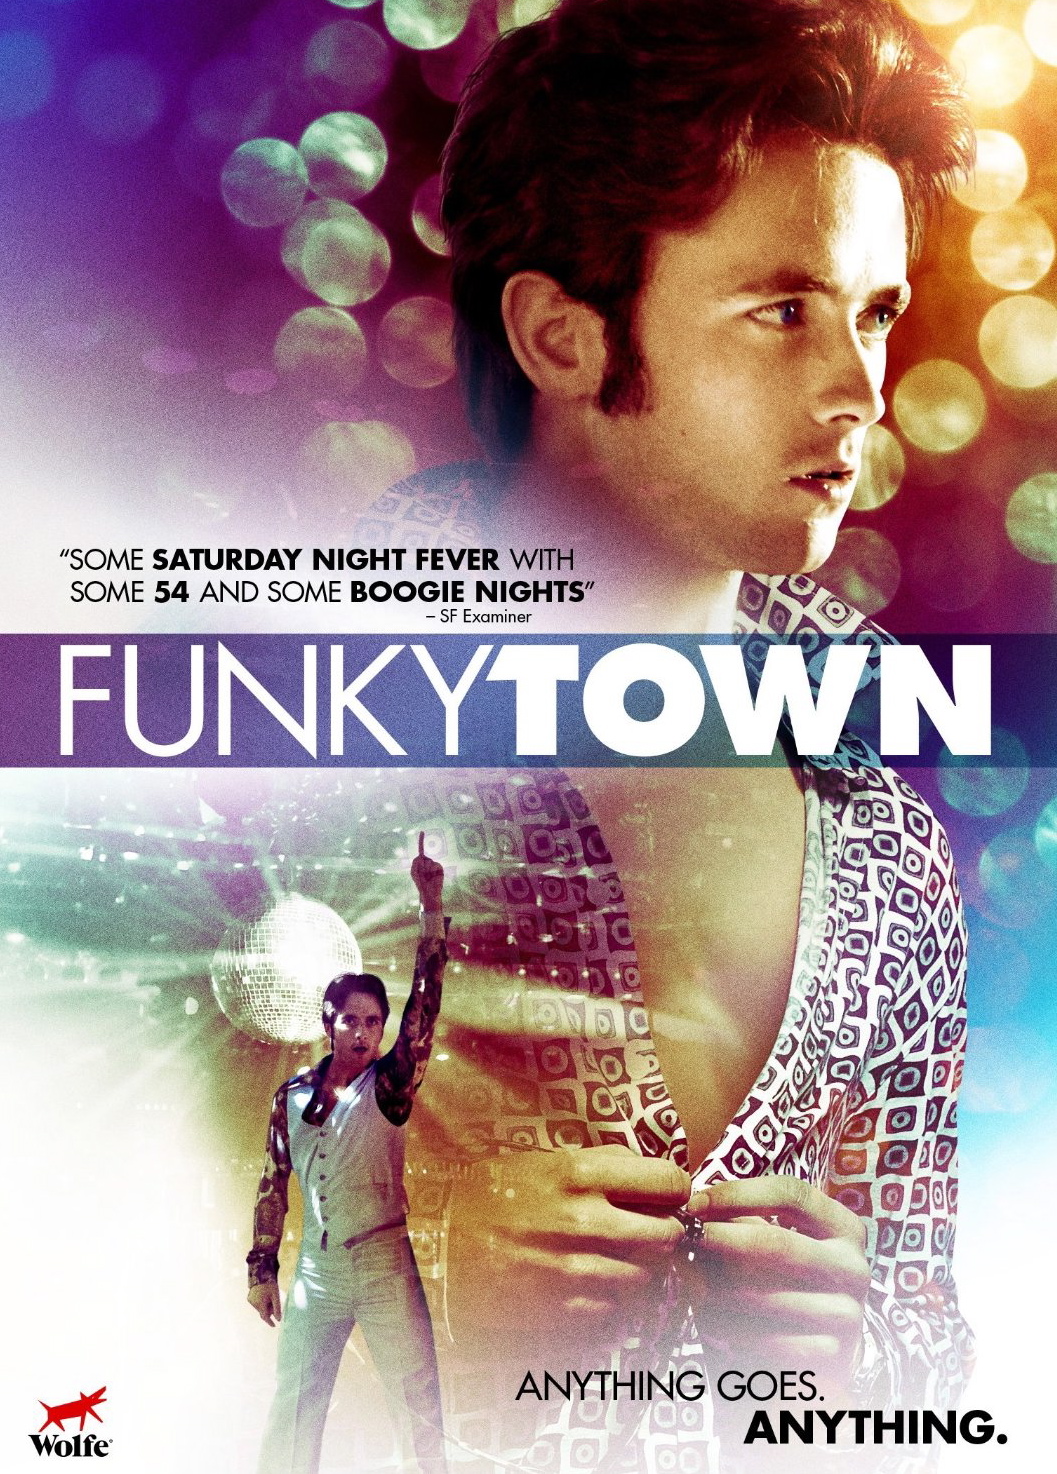 B.C.'s Justin Chatwin takes himself to Funkytown